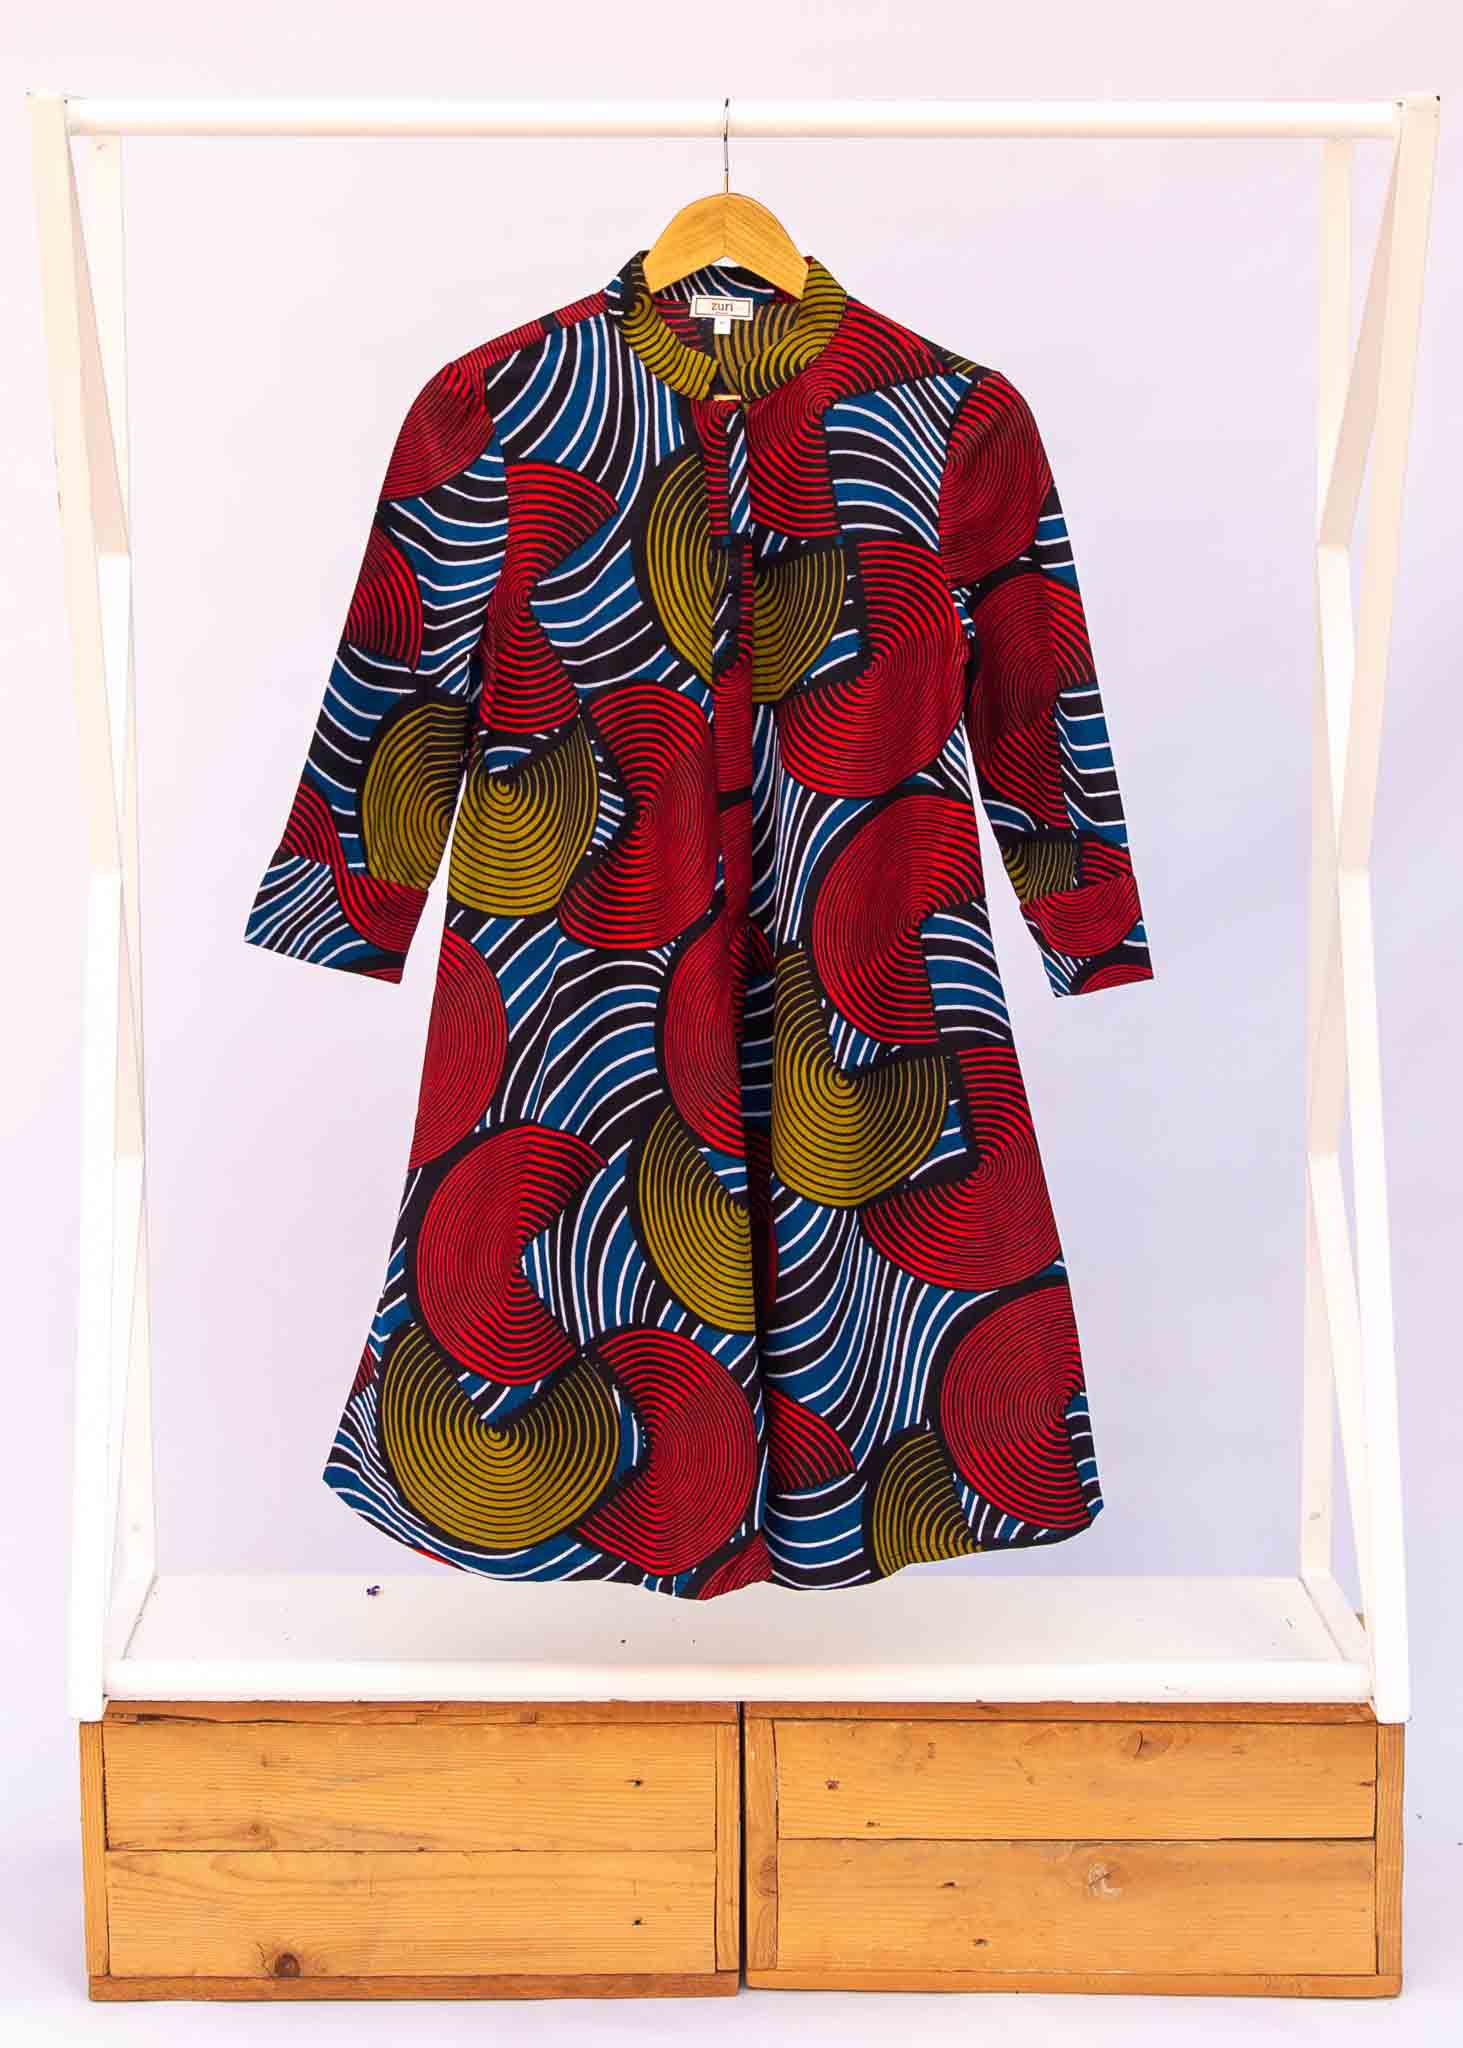 Display of circle design dress, featuring primary colors.